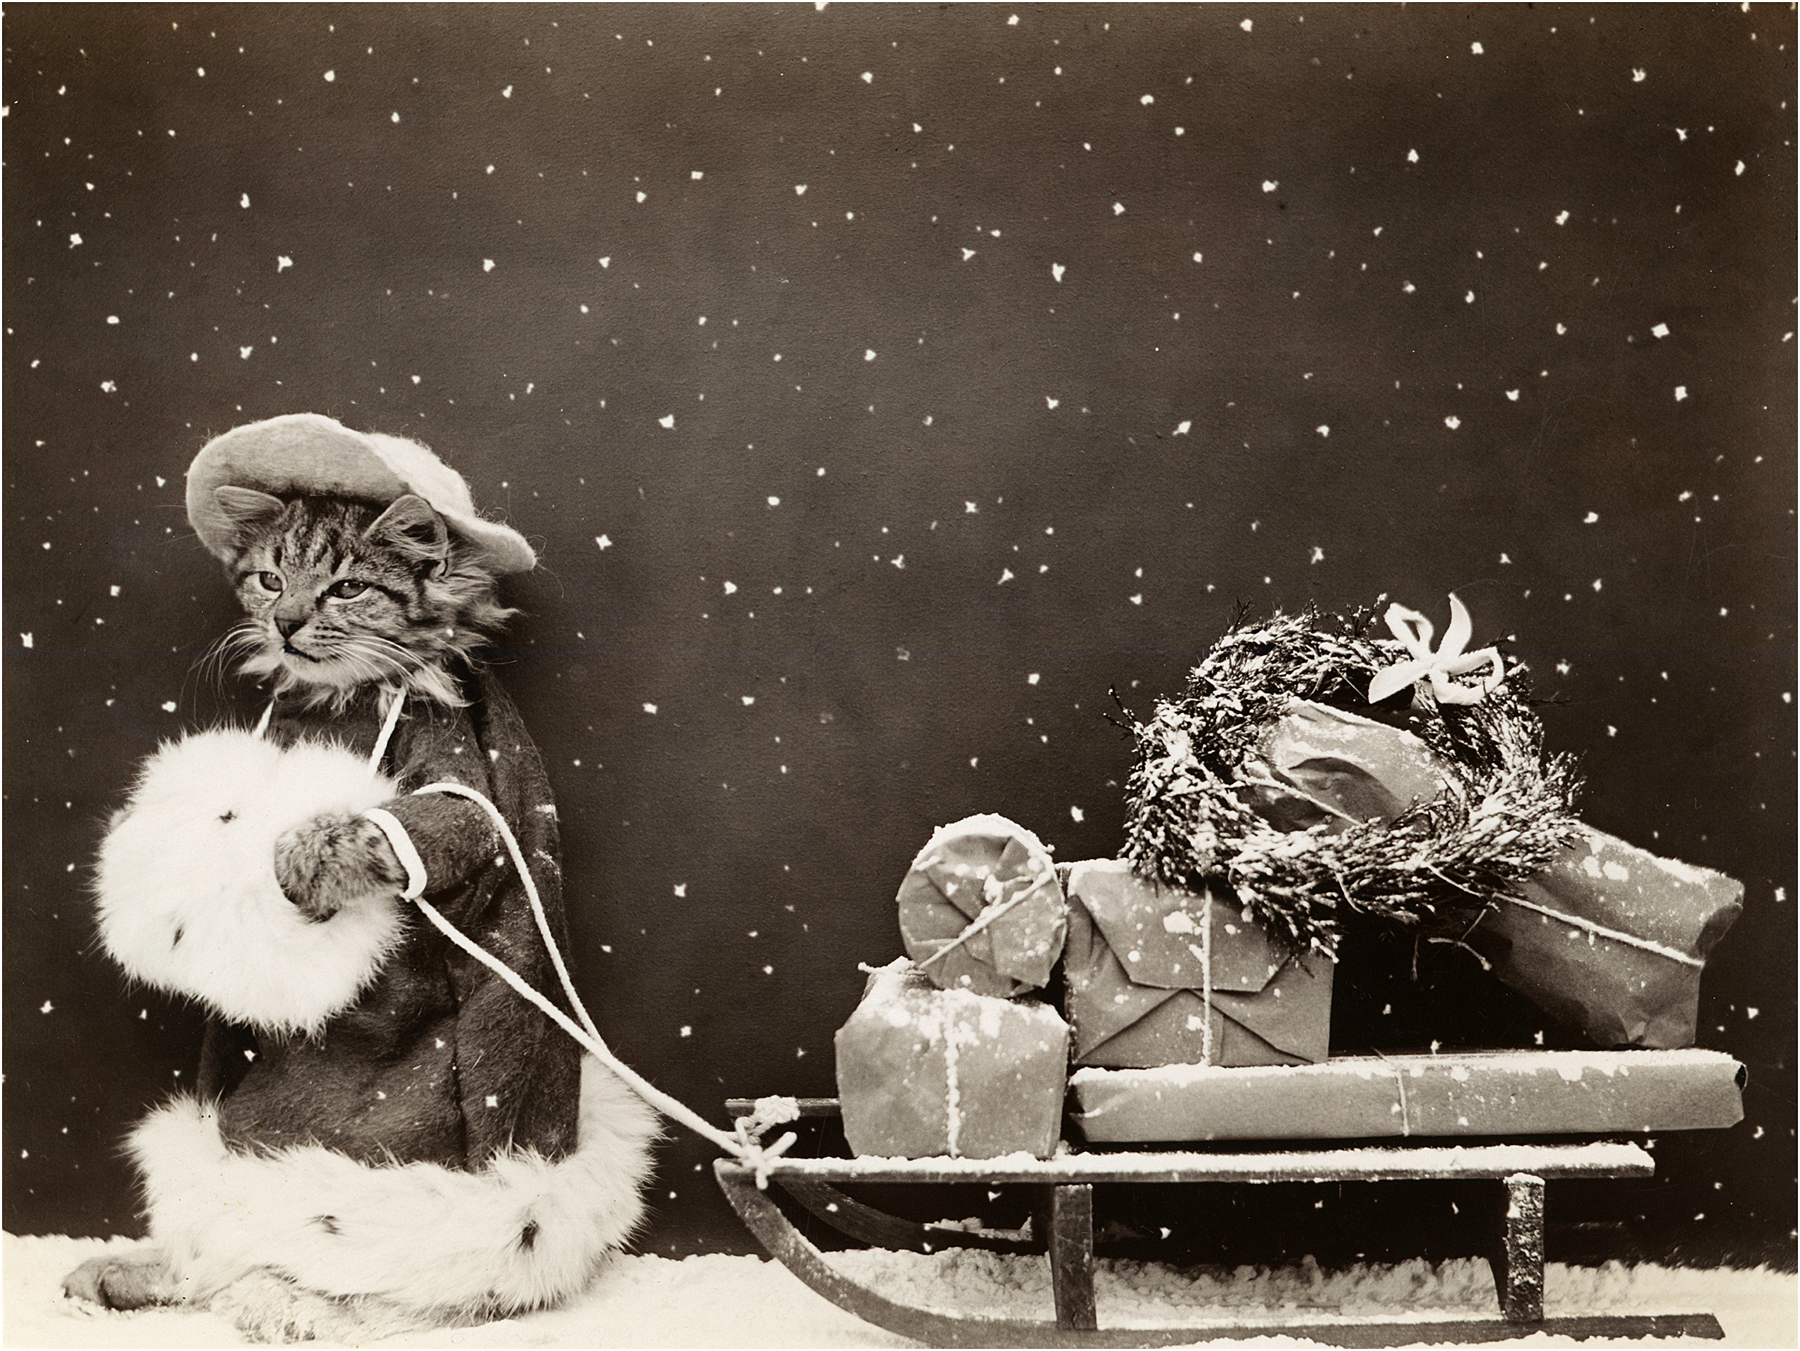 Super Cute Vintage Christmas Kitty Photo! - The Graphics Fairy